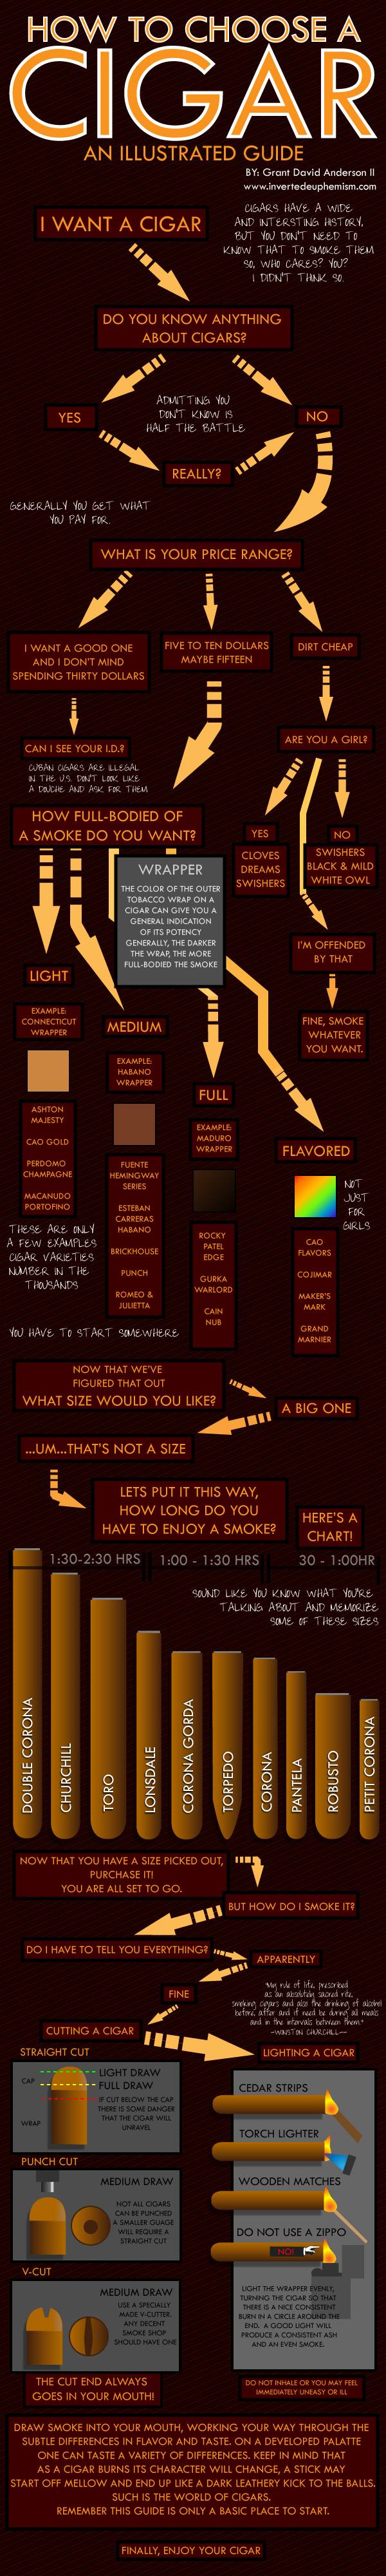 how-to-choose-cigar-infographic